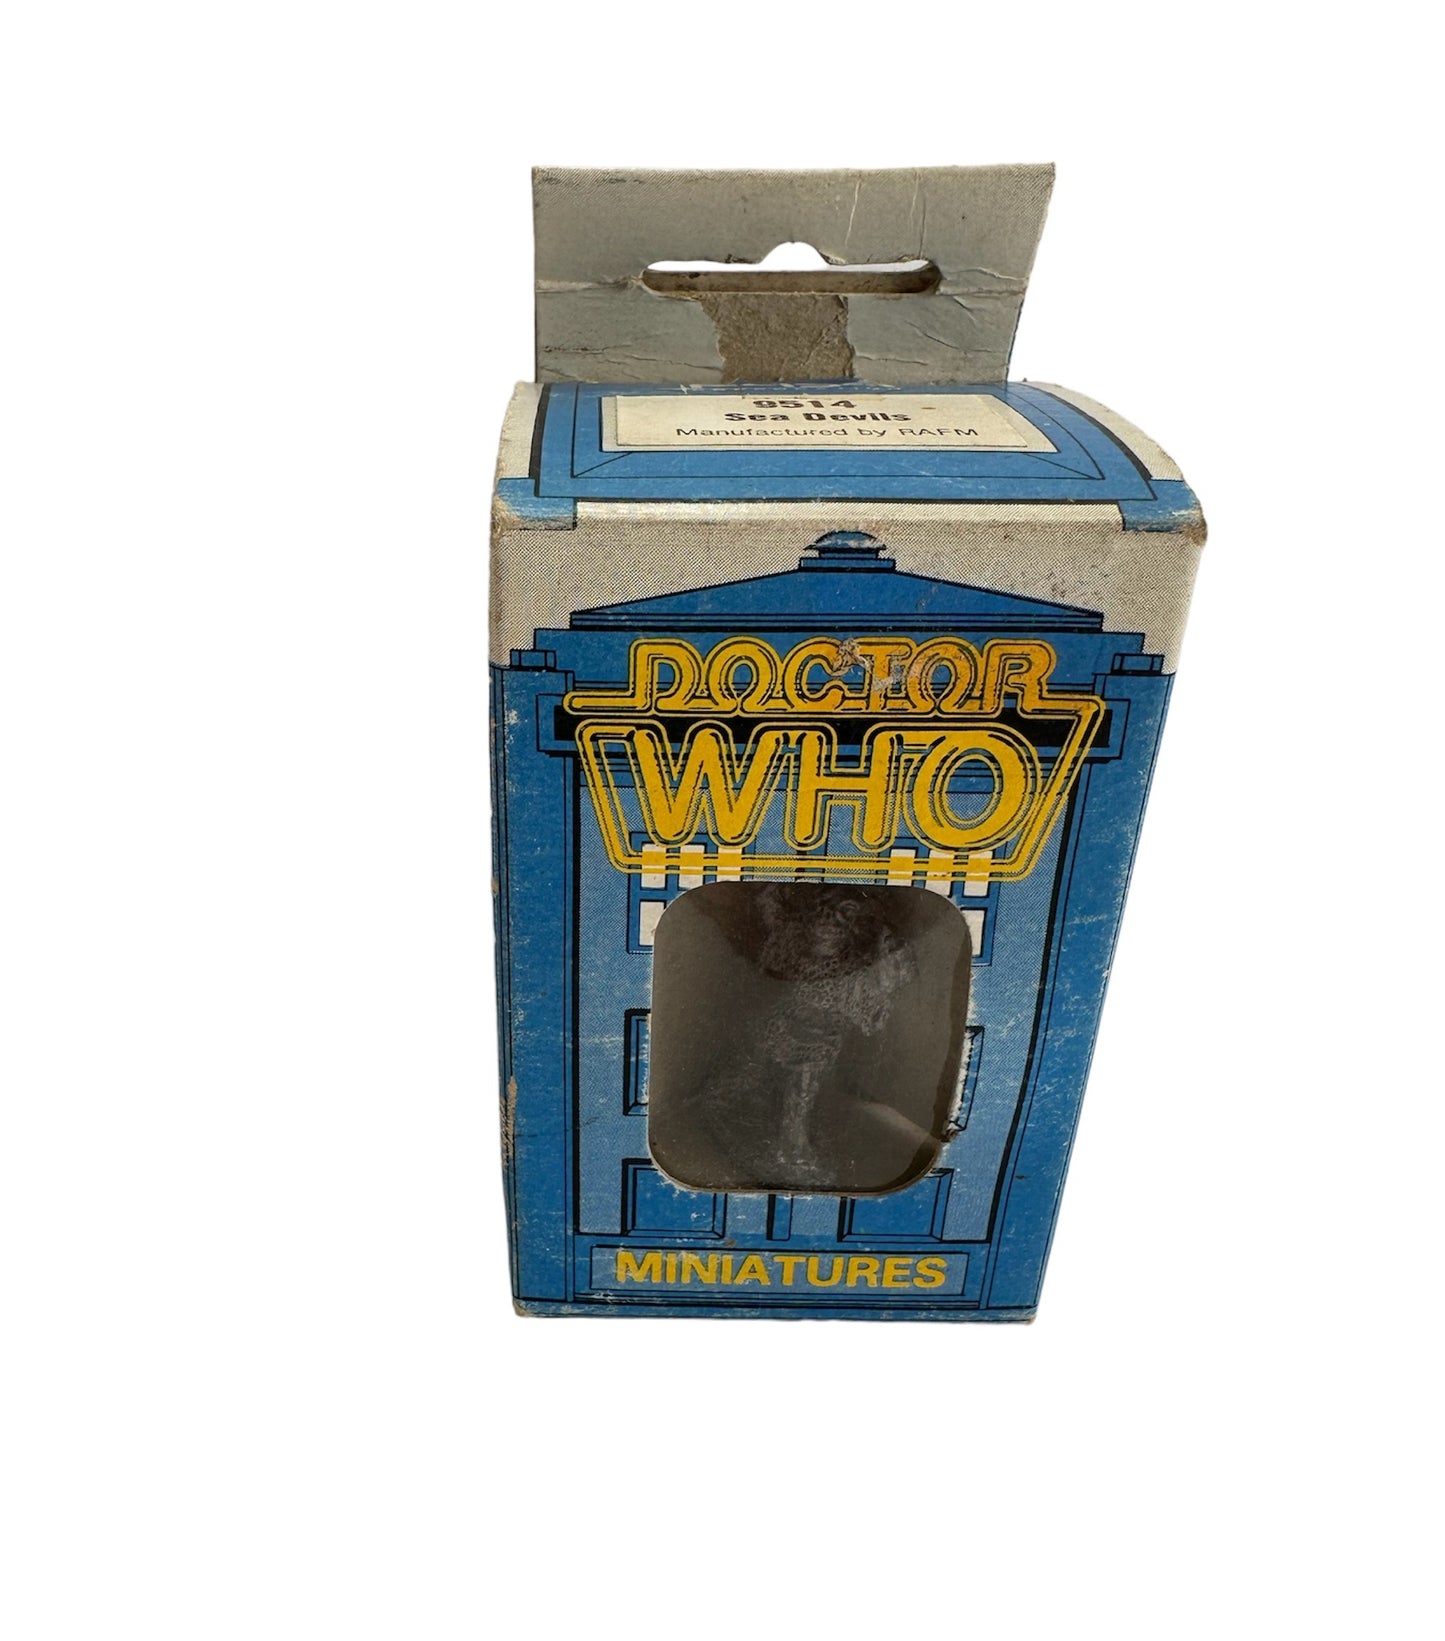 Vintage FASA Corp 1986 Doctor Dr Who Citadel Miniatures Metal Figures No. 9514 - The Sea Devils - Set Of 3 Figures - In The Original Box - Shop Stock Room Find